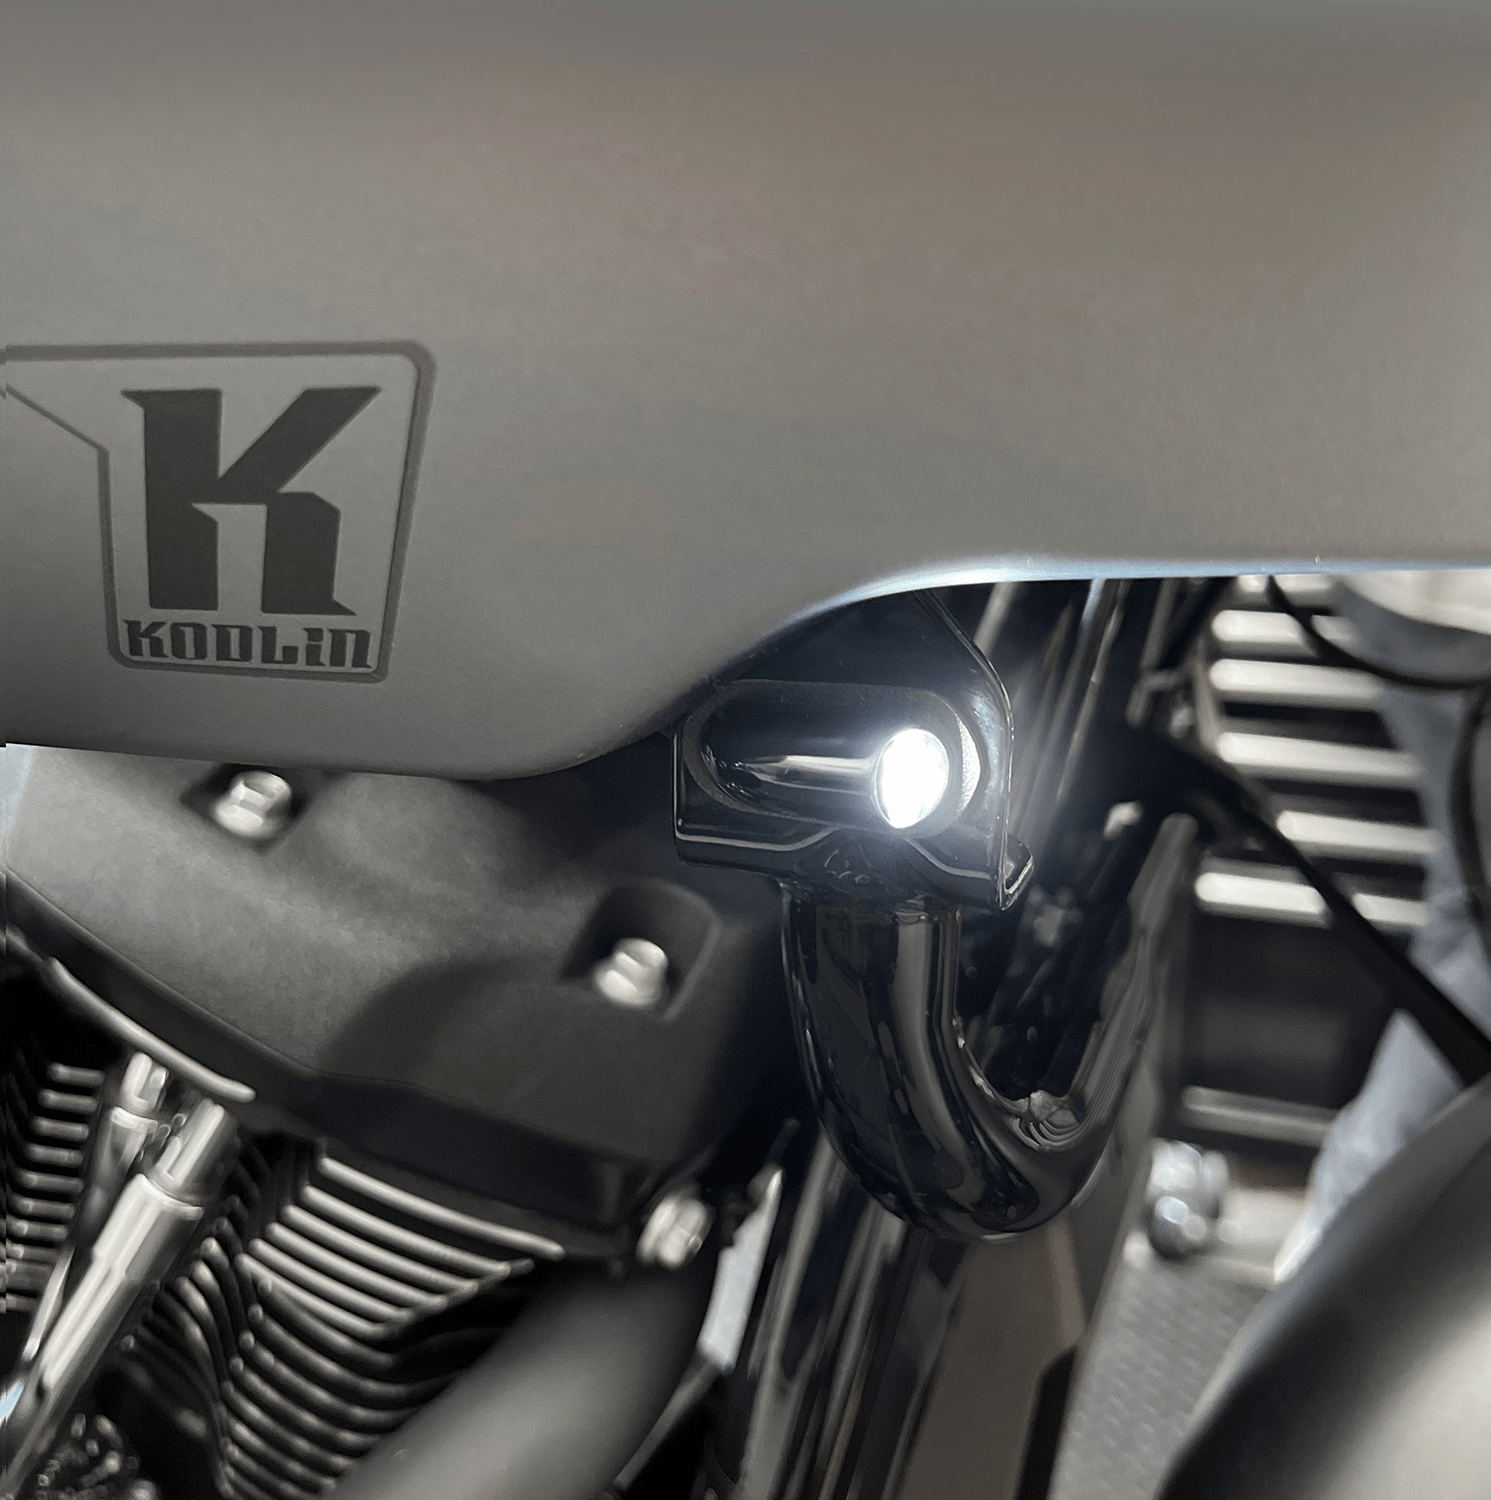 KODLIN-Neowise Bullet Smooth 2-1 LED Turn Signal / '22 Lowrider-Turn Signals-MetalCore Harley Supply